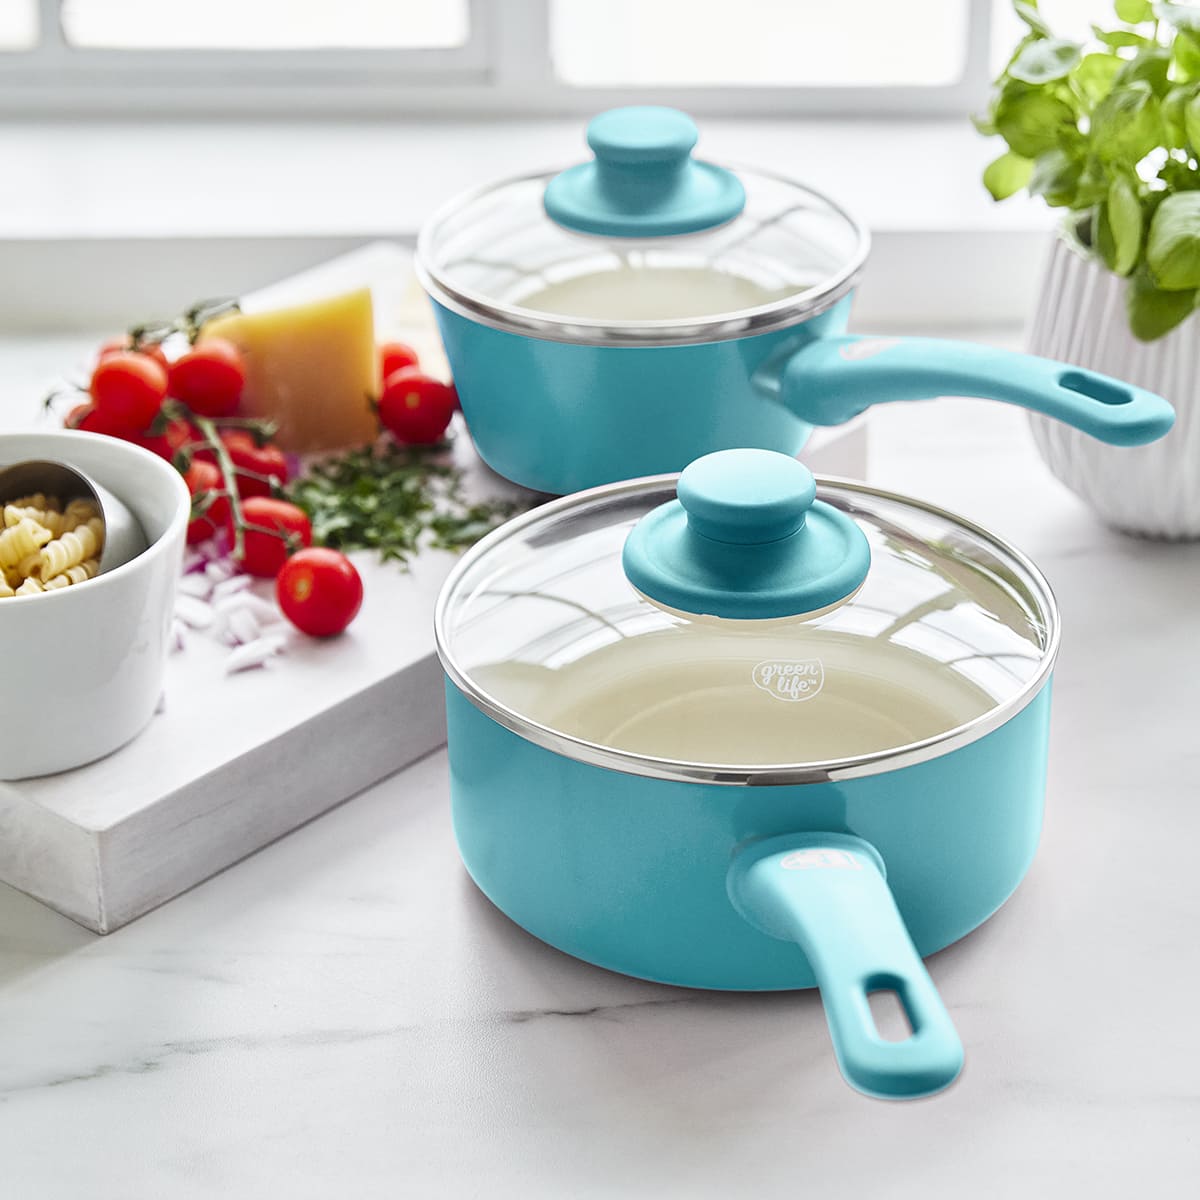 GREENLIFE SOFT GRIP <br> 4PC COOKWARE SETS, CARRIBEAN BLUE